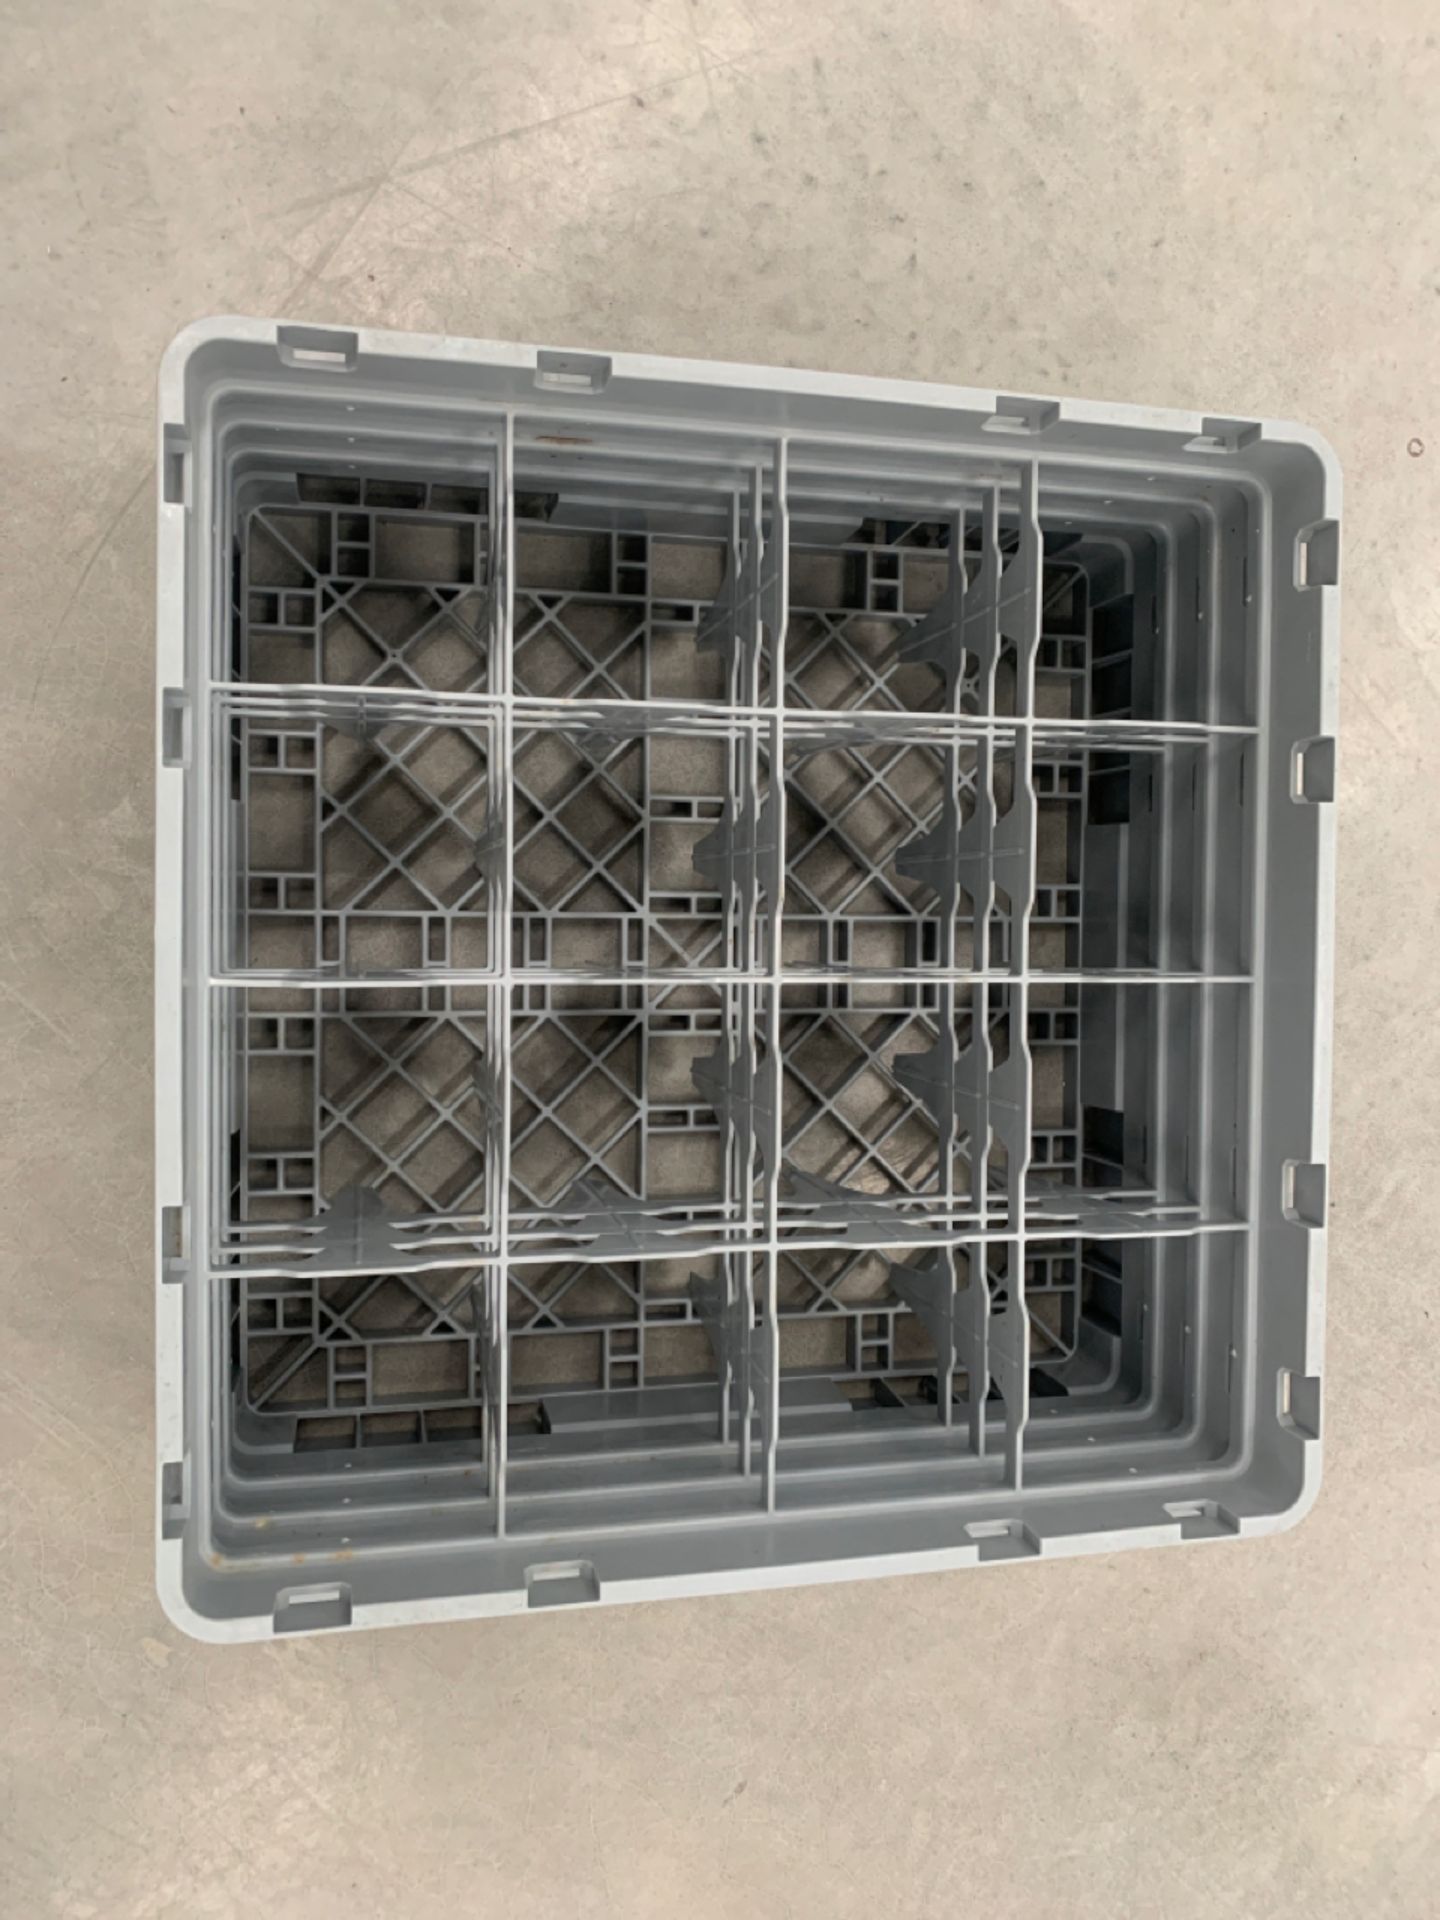 Set of 4 Cambro Camrack Three Heights Washing Baskets 16 Comp - Image 3 of 3